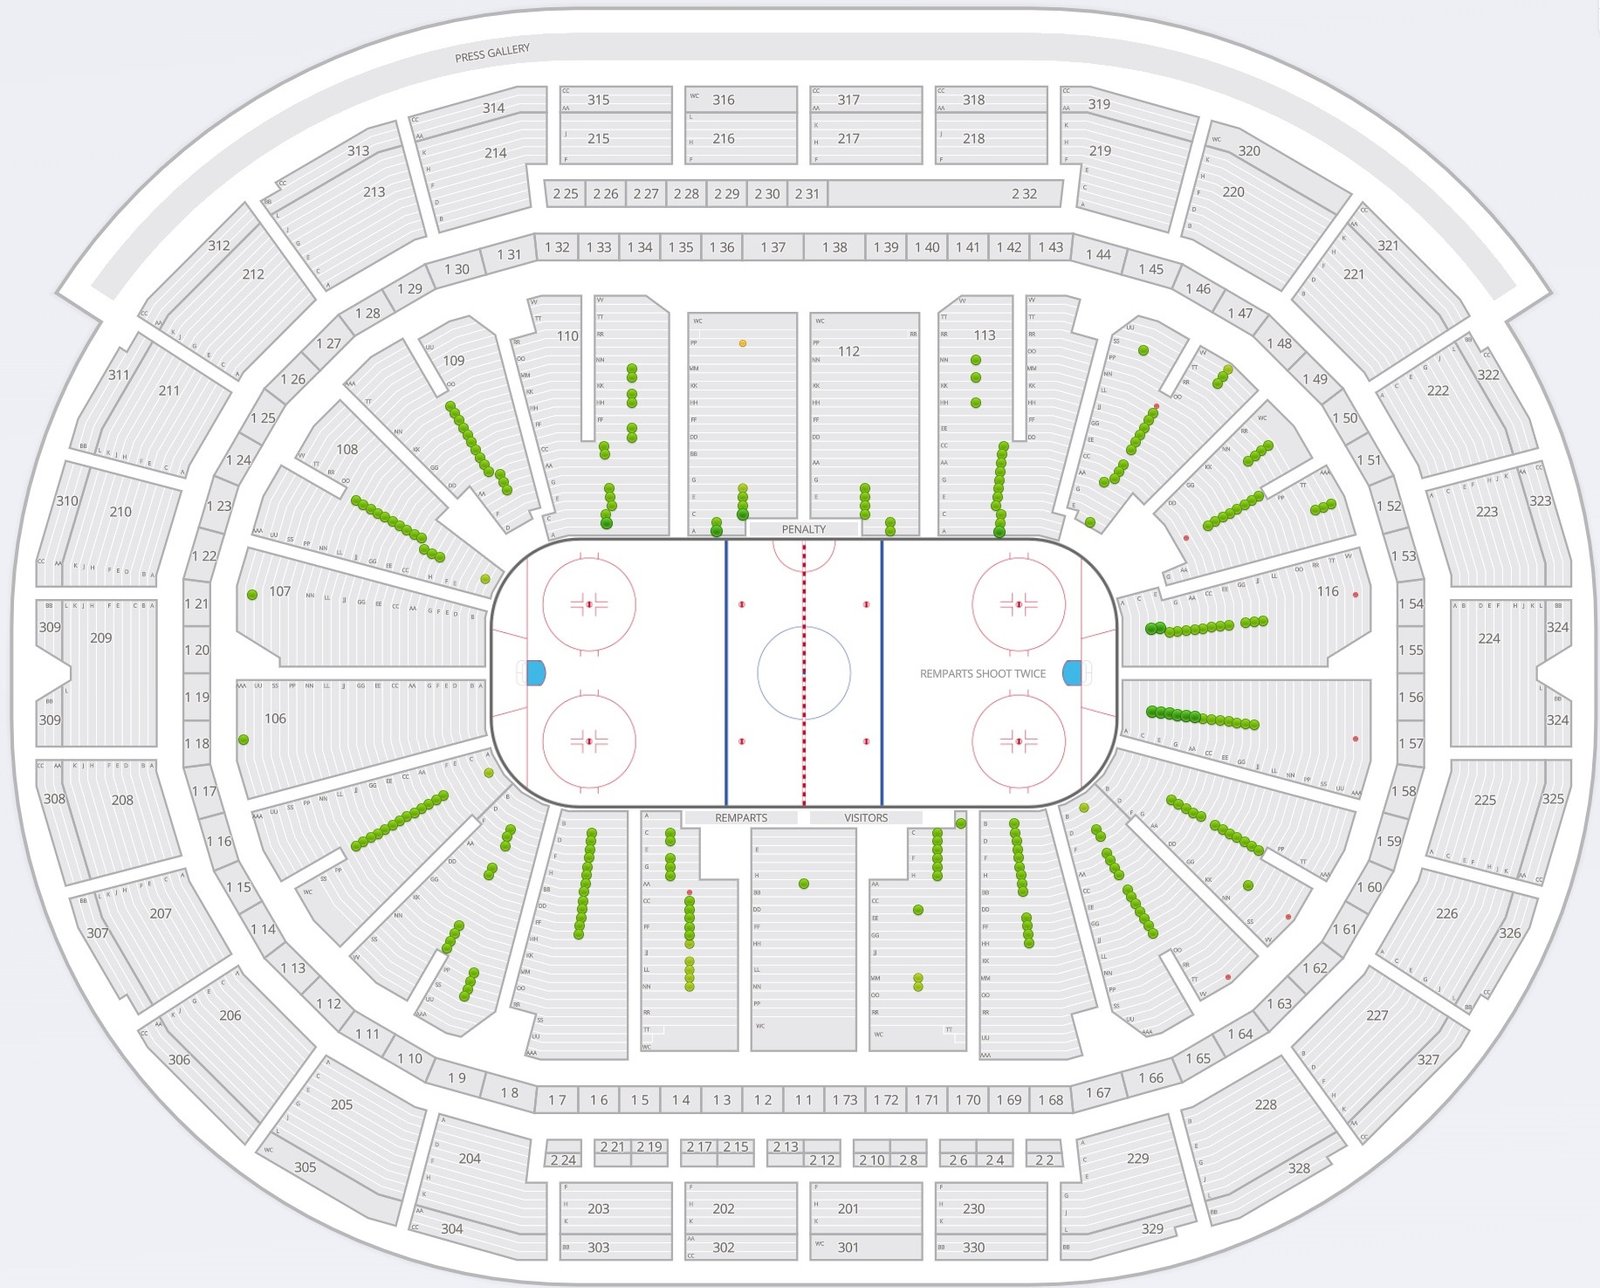 Videotron Centre Seating Chart with Seat Numbers and Rows